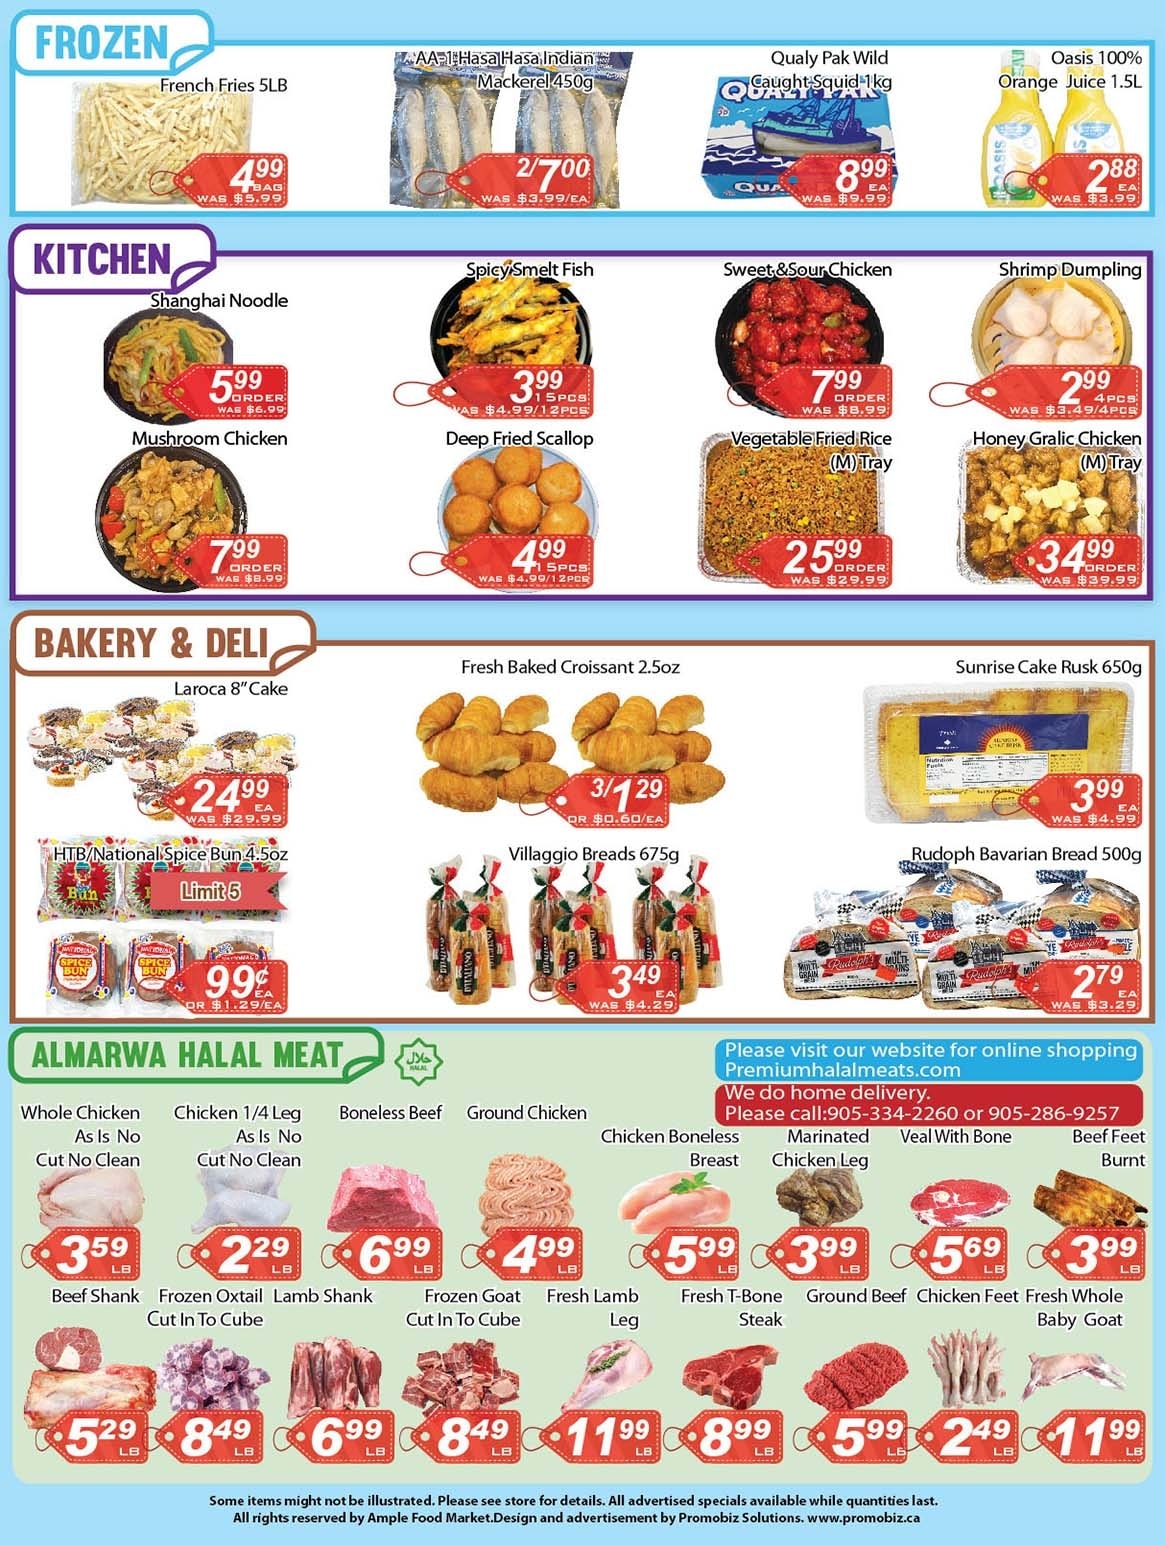 Ample Food Market - Brampton Store - Weekly Flyer Specials - Page 4